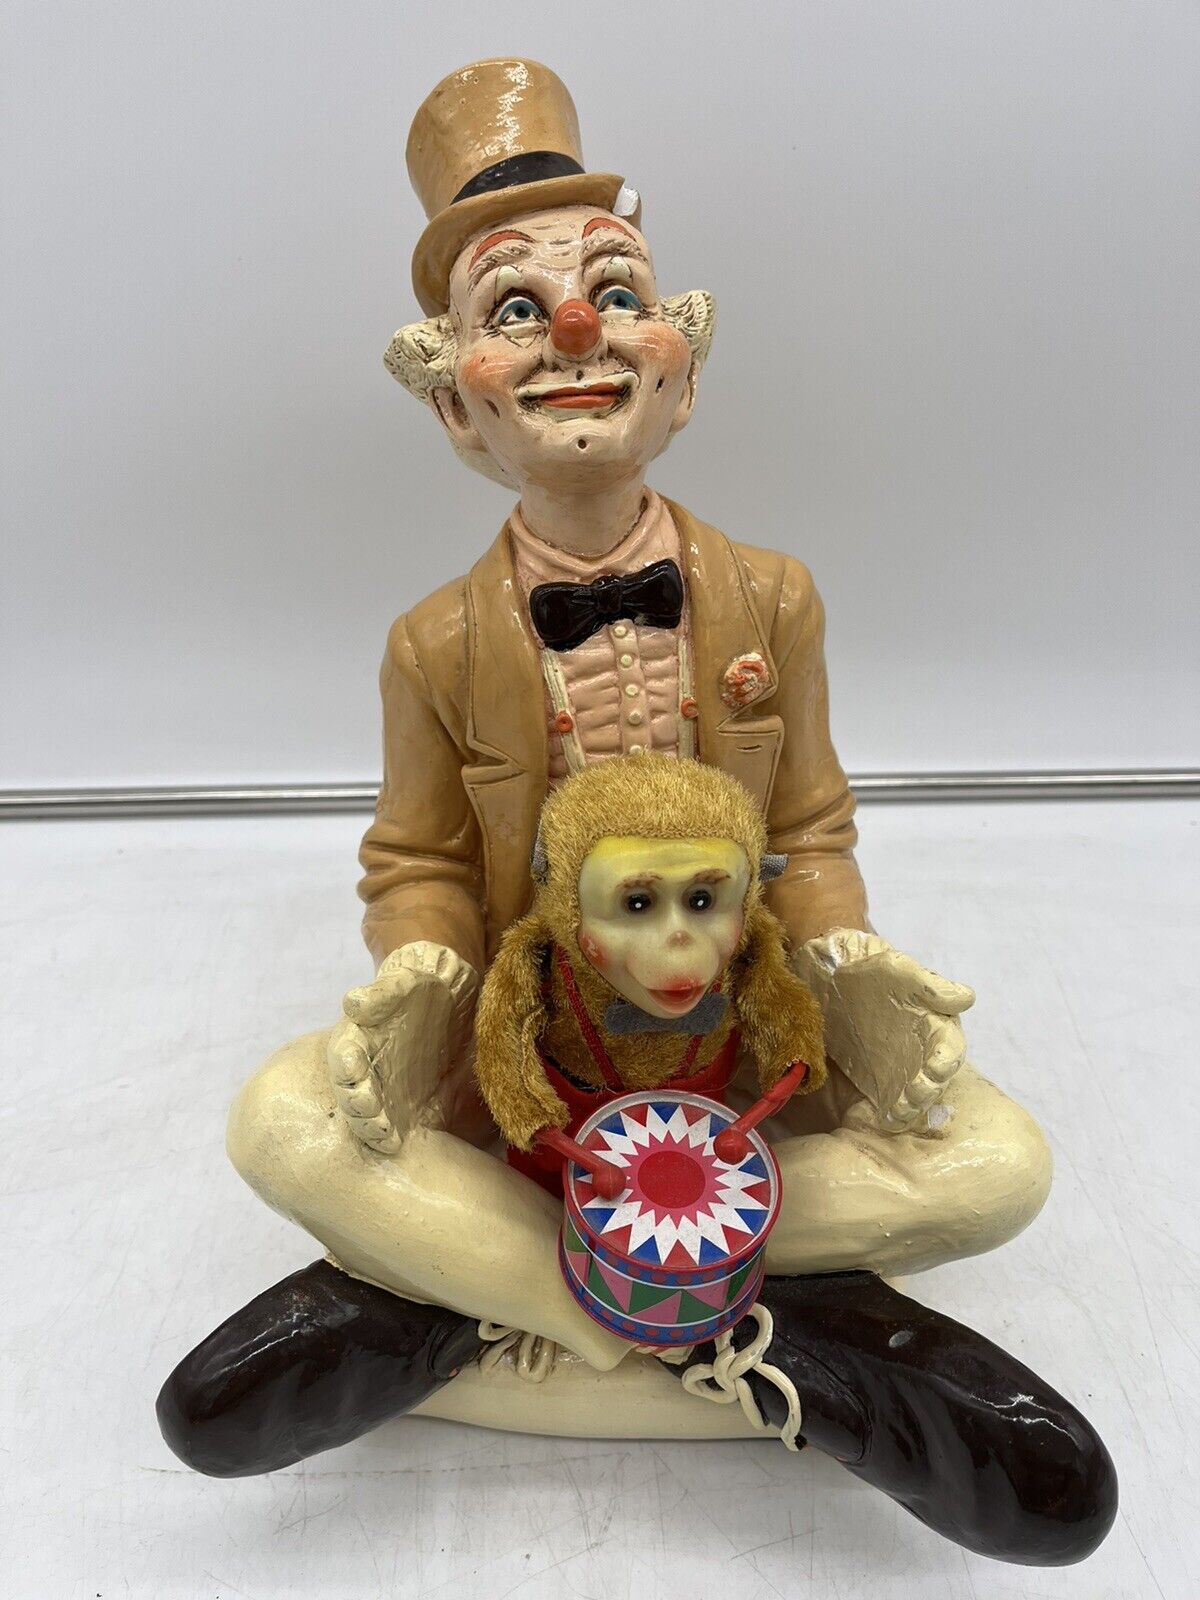 Vintage 1982 Judys Pastime Circus Carnival Clown Statue +Monkey play drum works